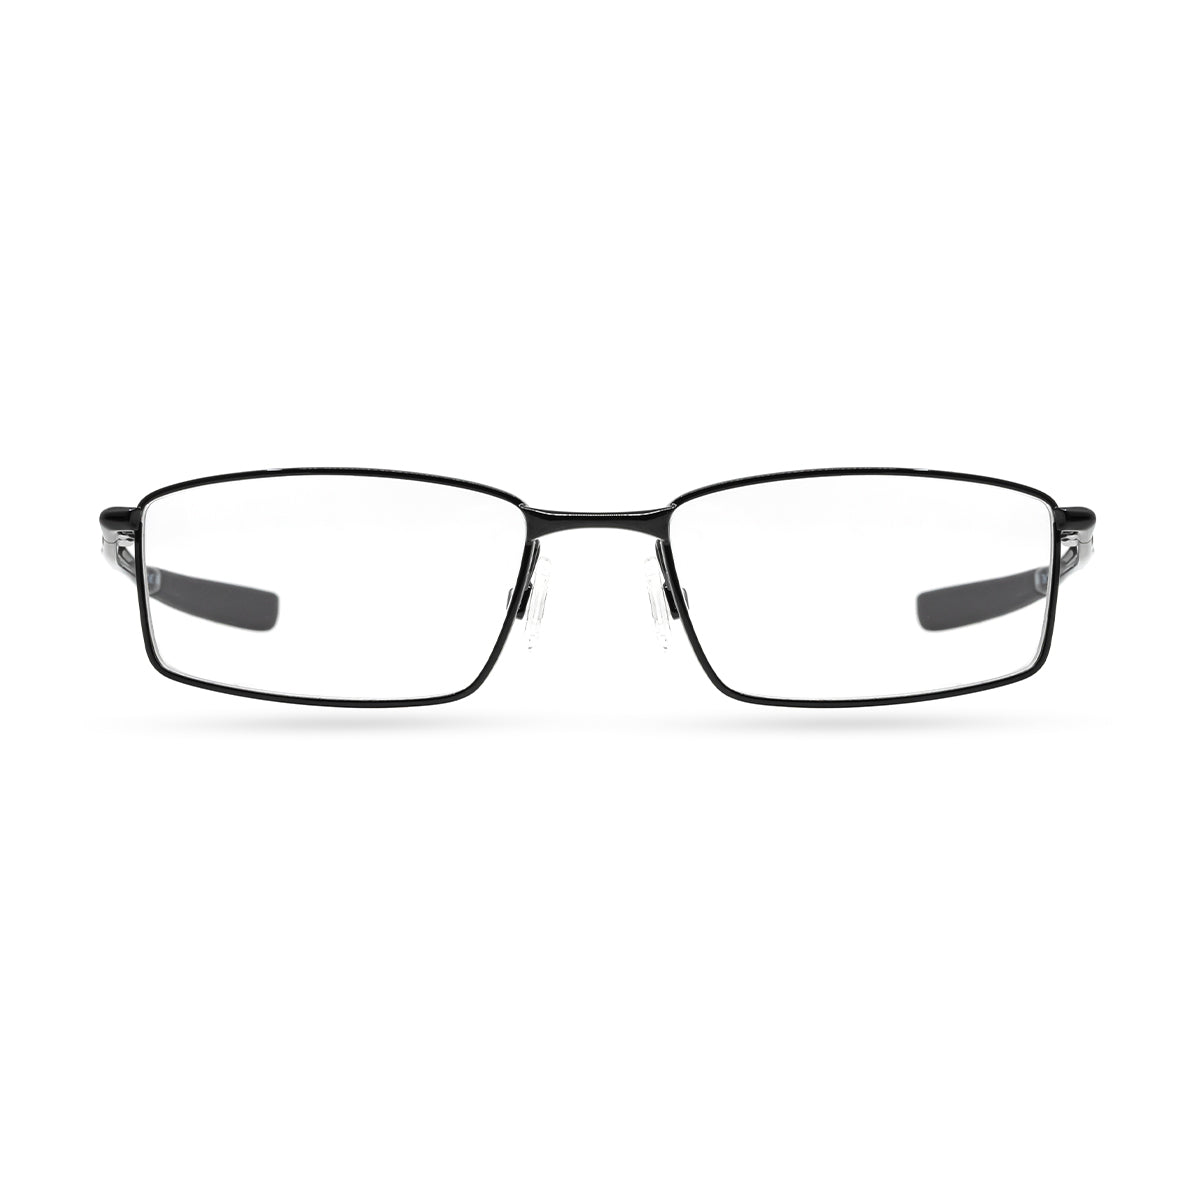 OAKLEY OX3180 04 spectacle-frame